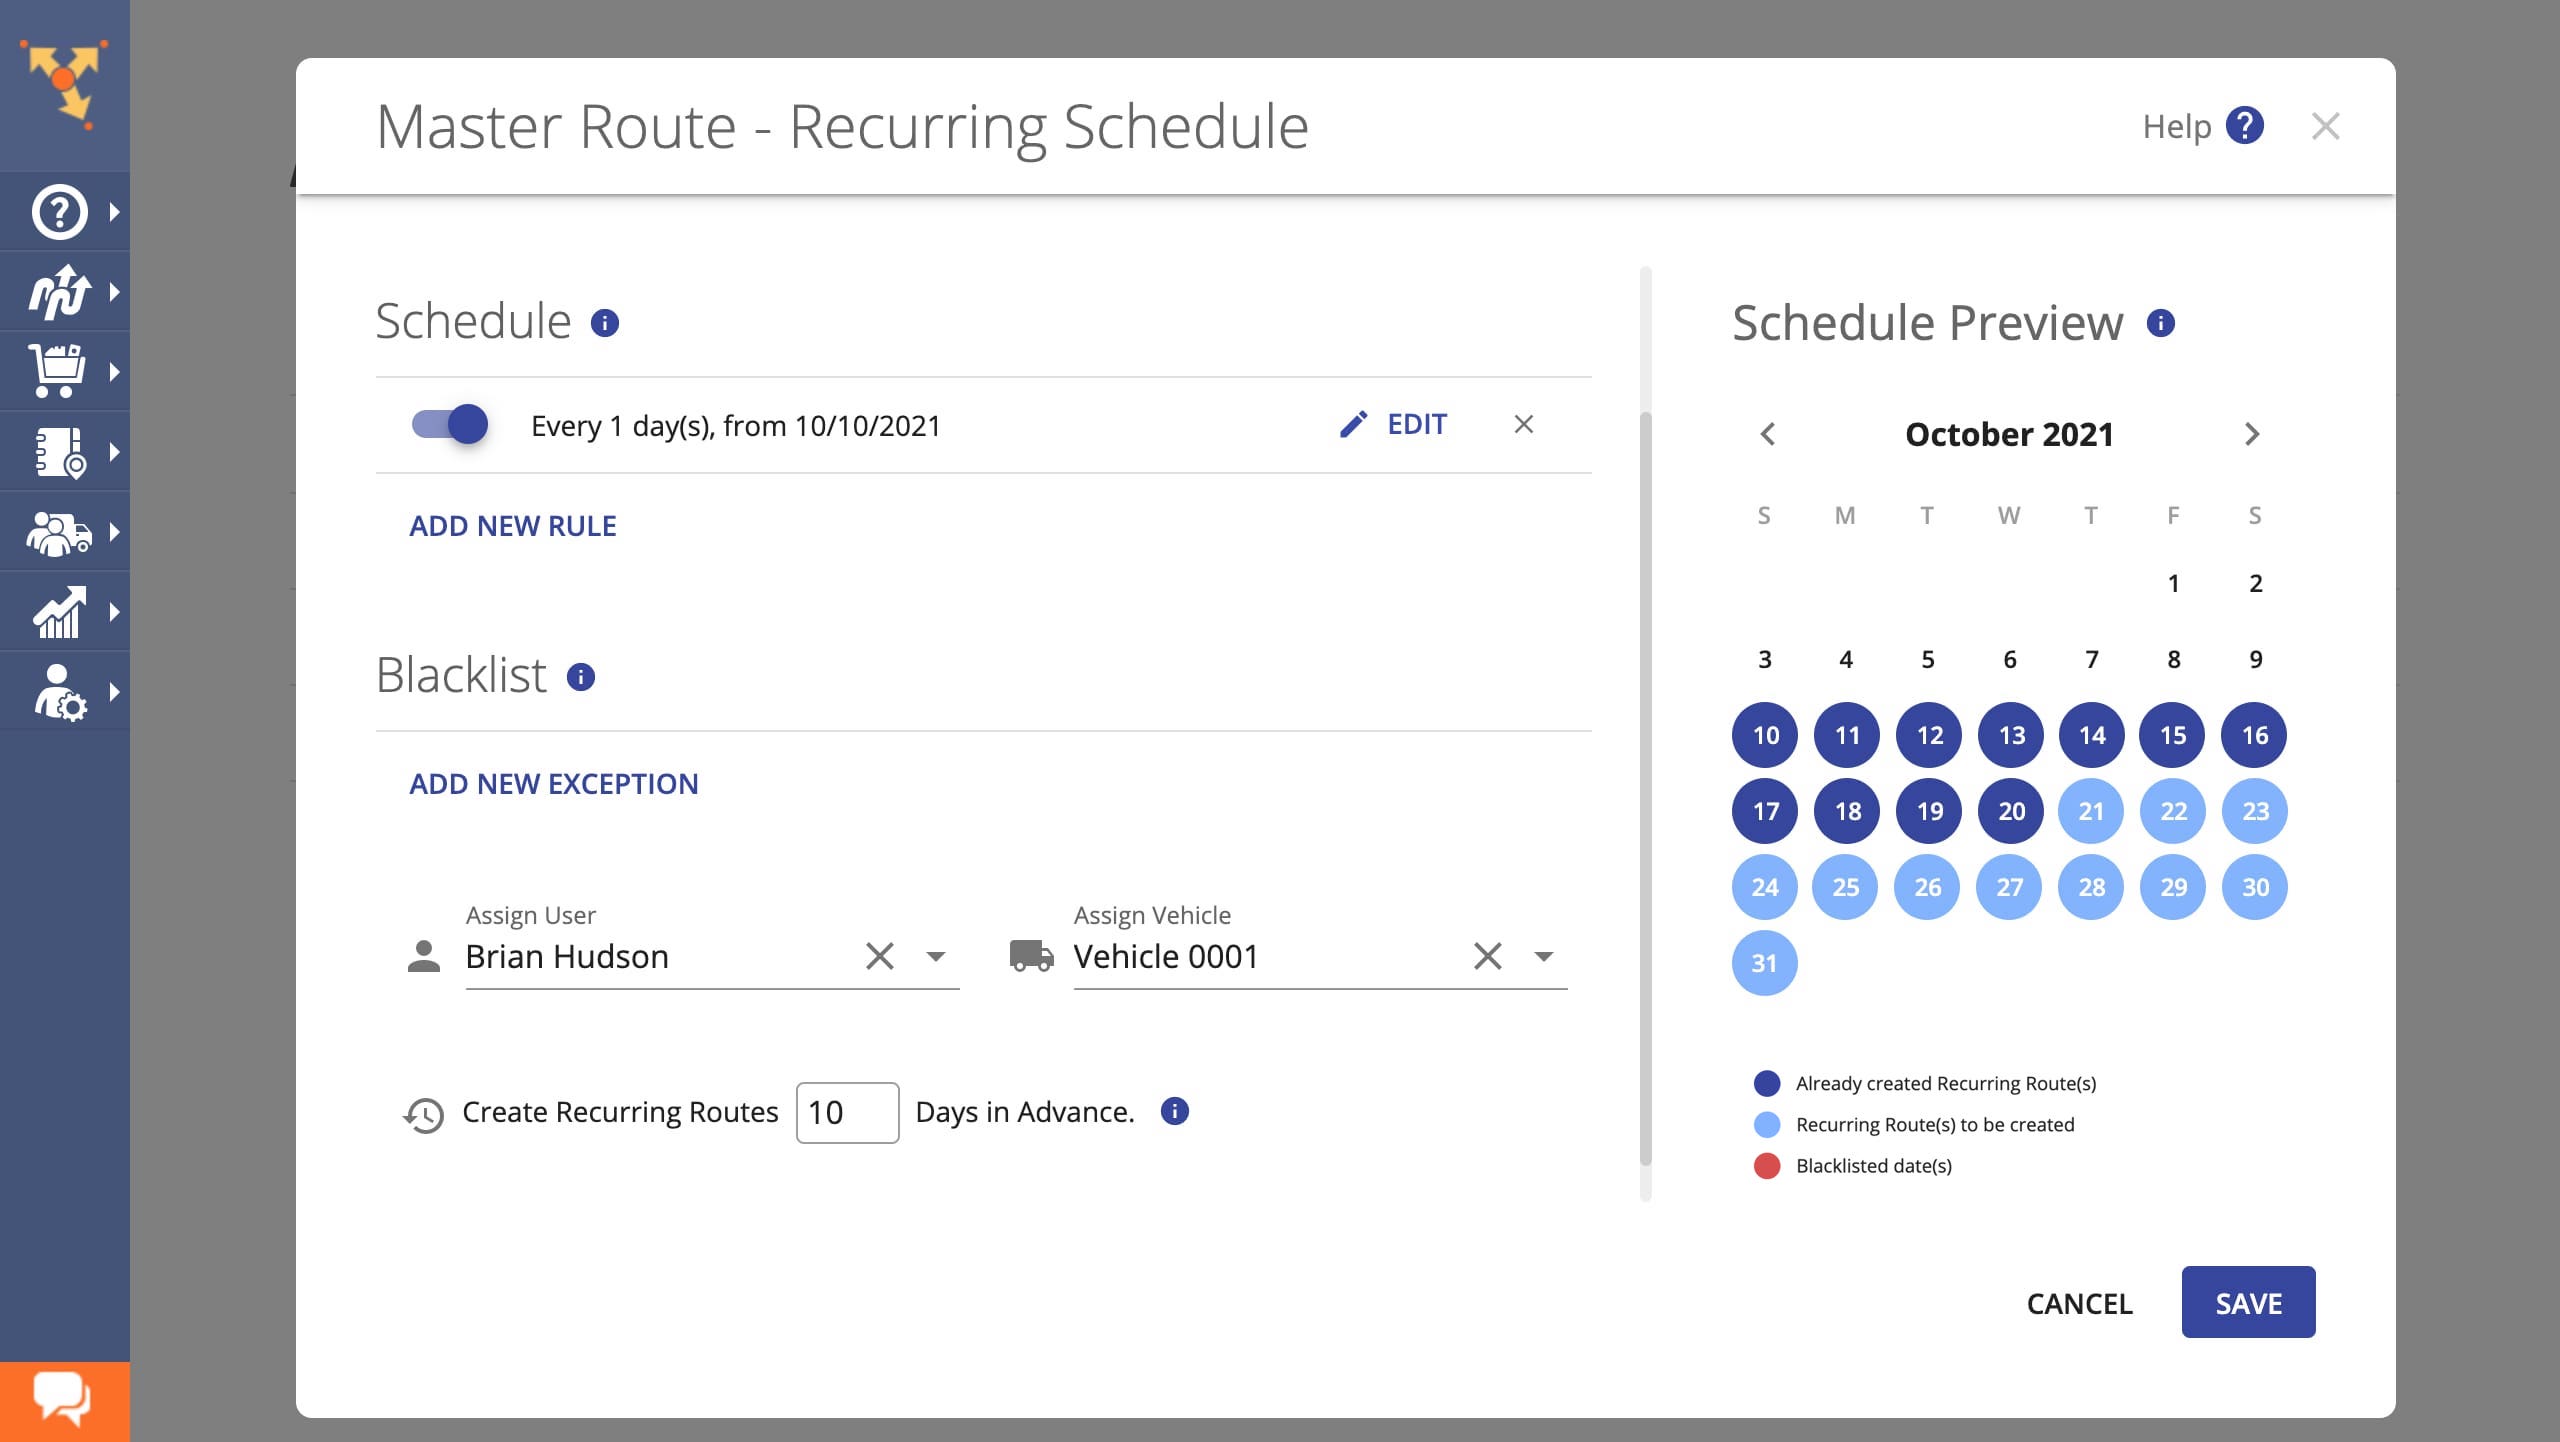 Plan scheduled recurring routes ahead of route start time to get more visibility into the workload.